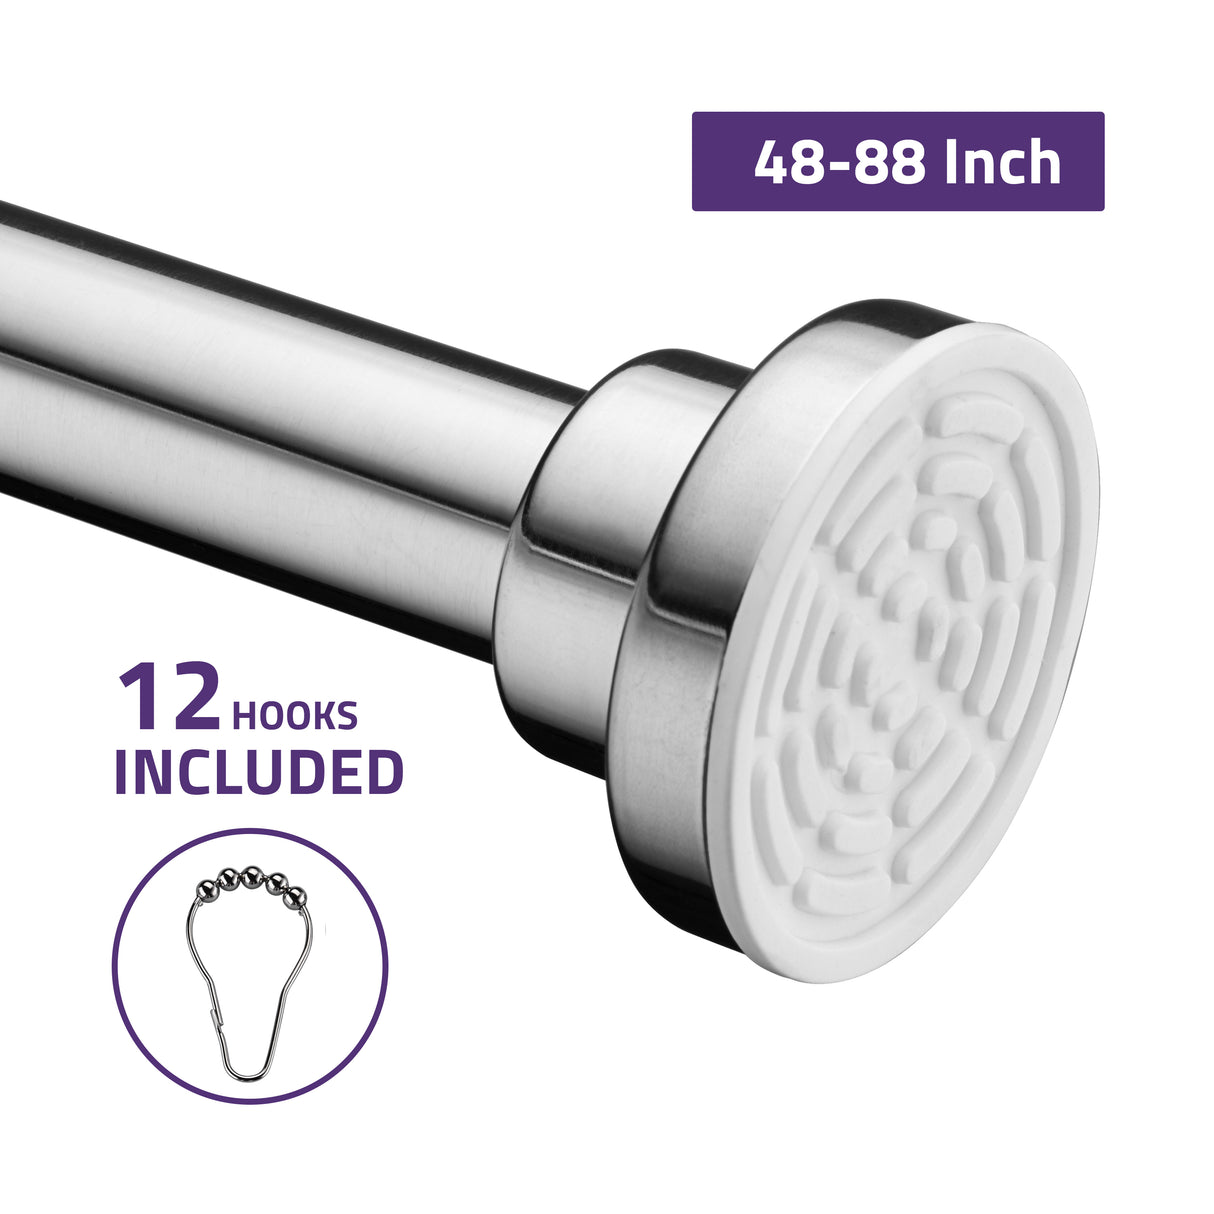 ANZZI AC-AZSR88CH 48-88 Inches Shower Curtain Rod with Shower Hooks in Polished Chrome | Adjustable Tension Shower Doorway Curtain Rod | Rust Resistant No Drilling Anti-Slip Bar for Bathroom | AC-AZSR88CH